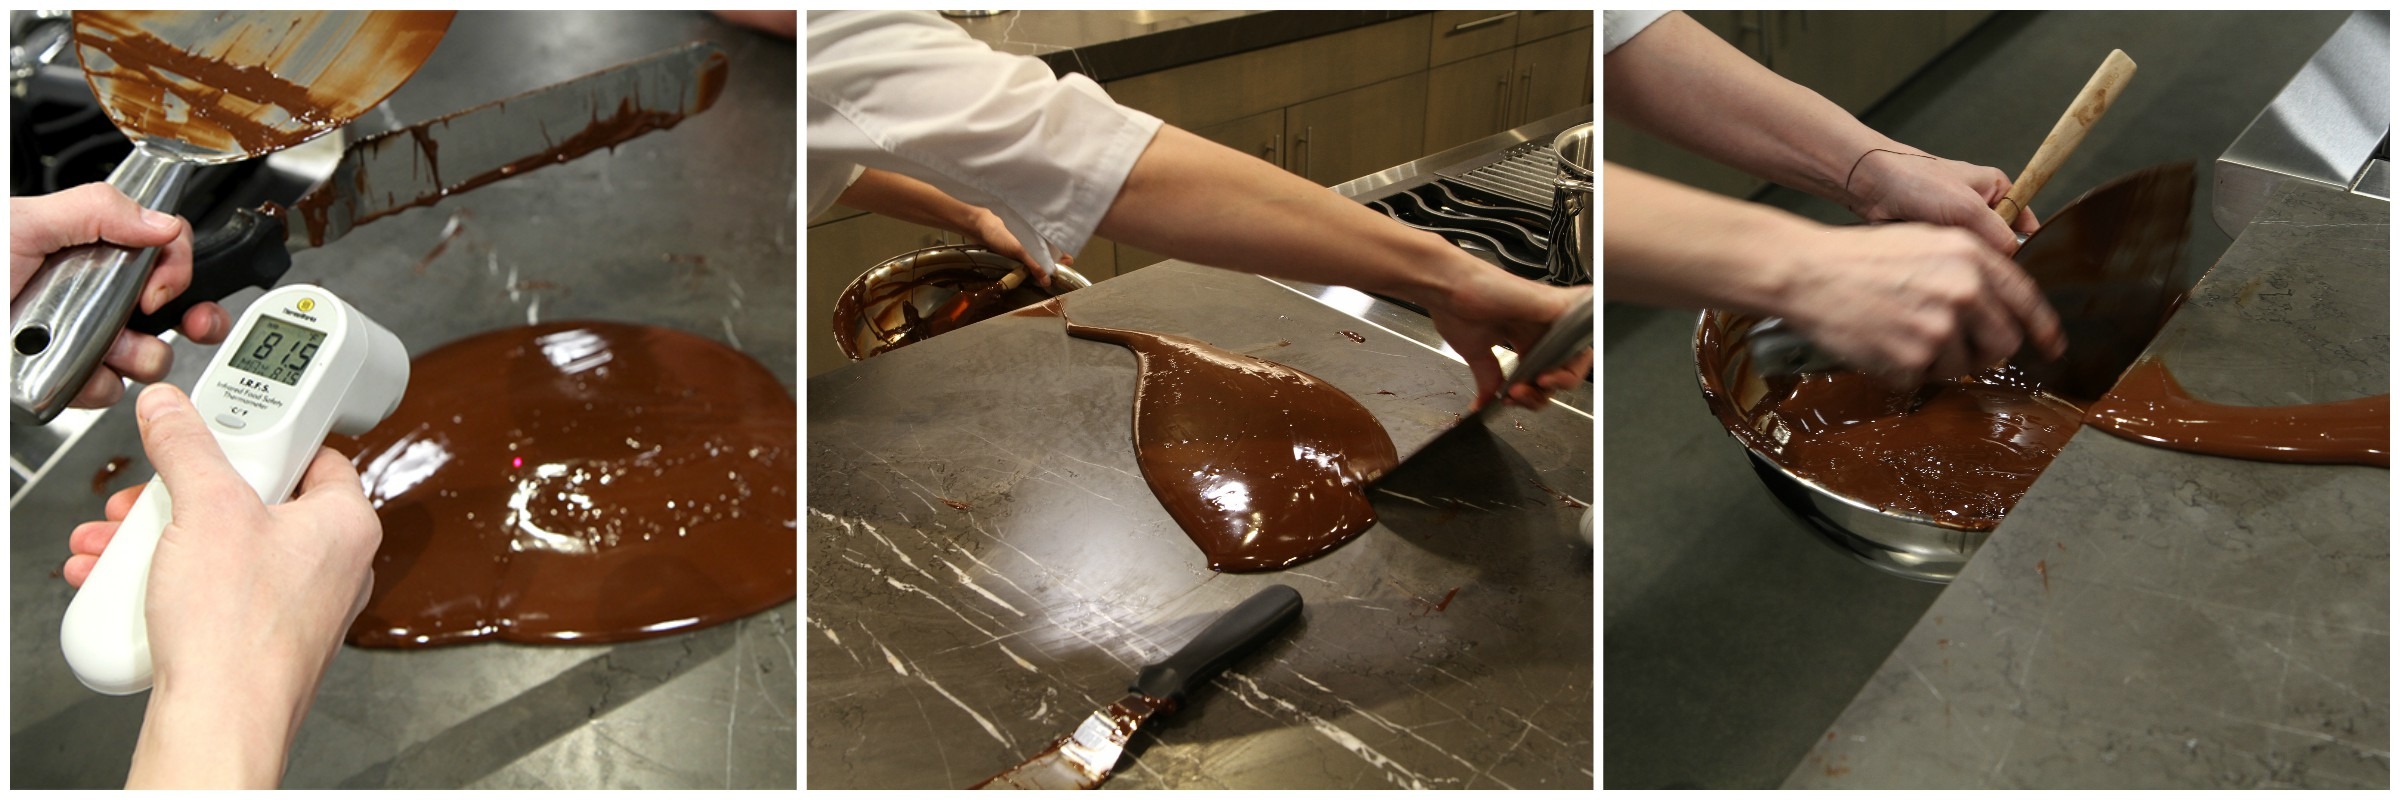 Scraping Chocolate Collage